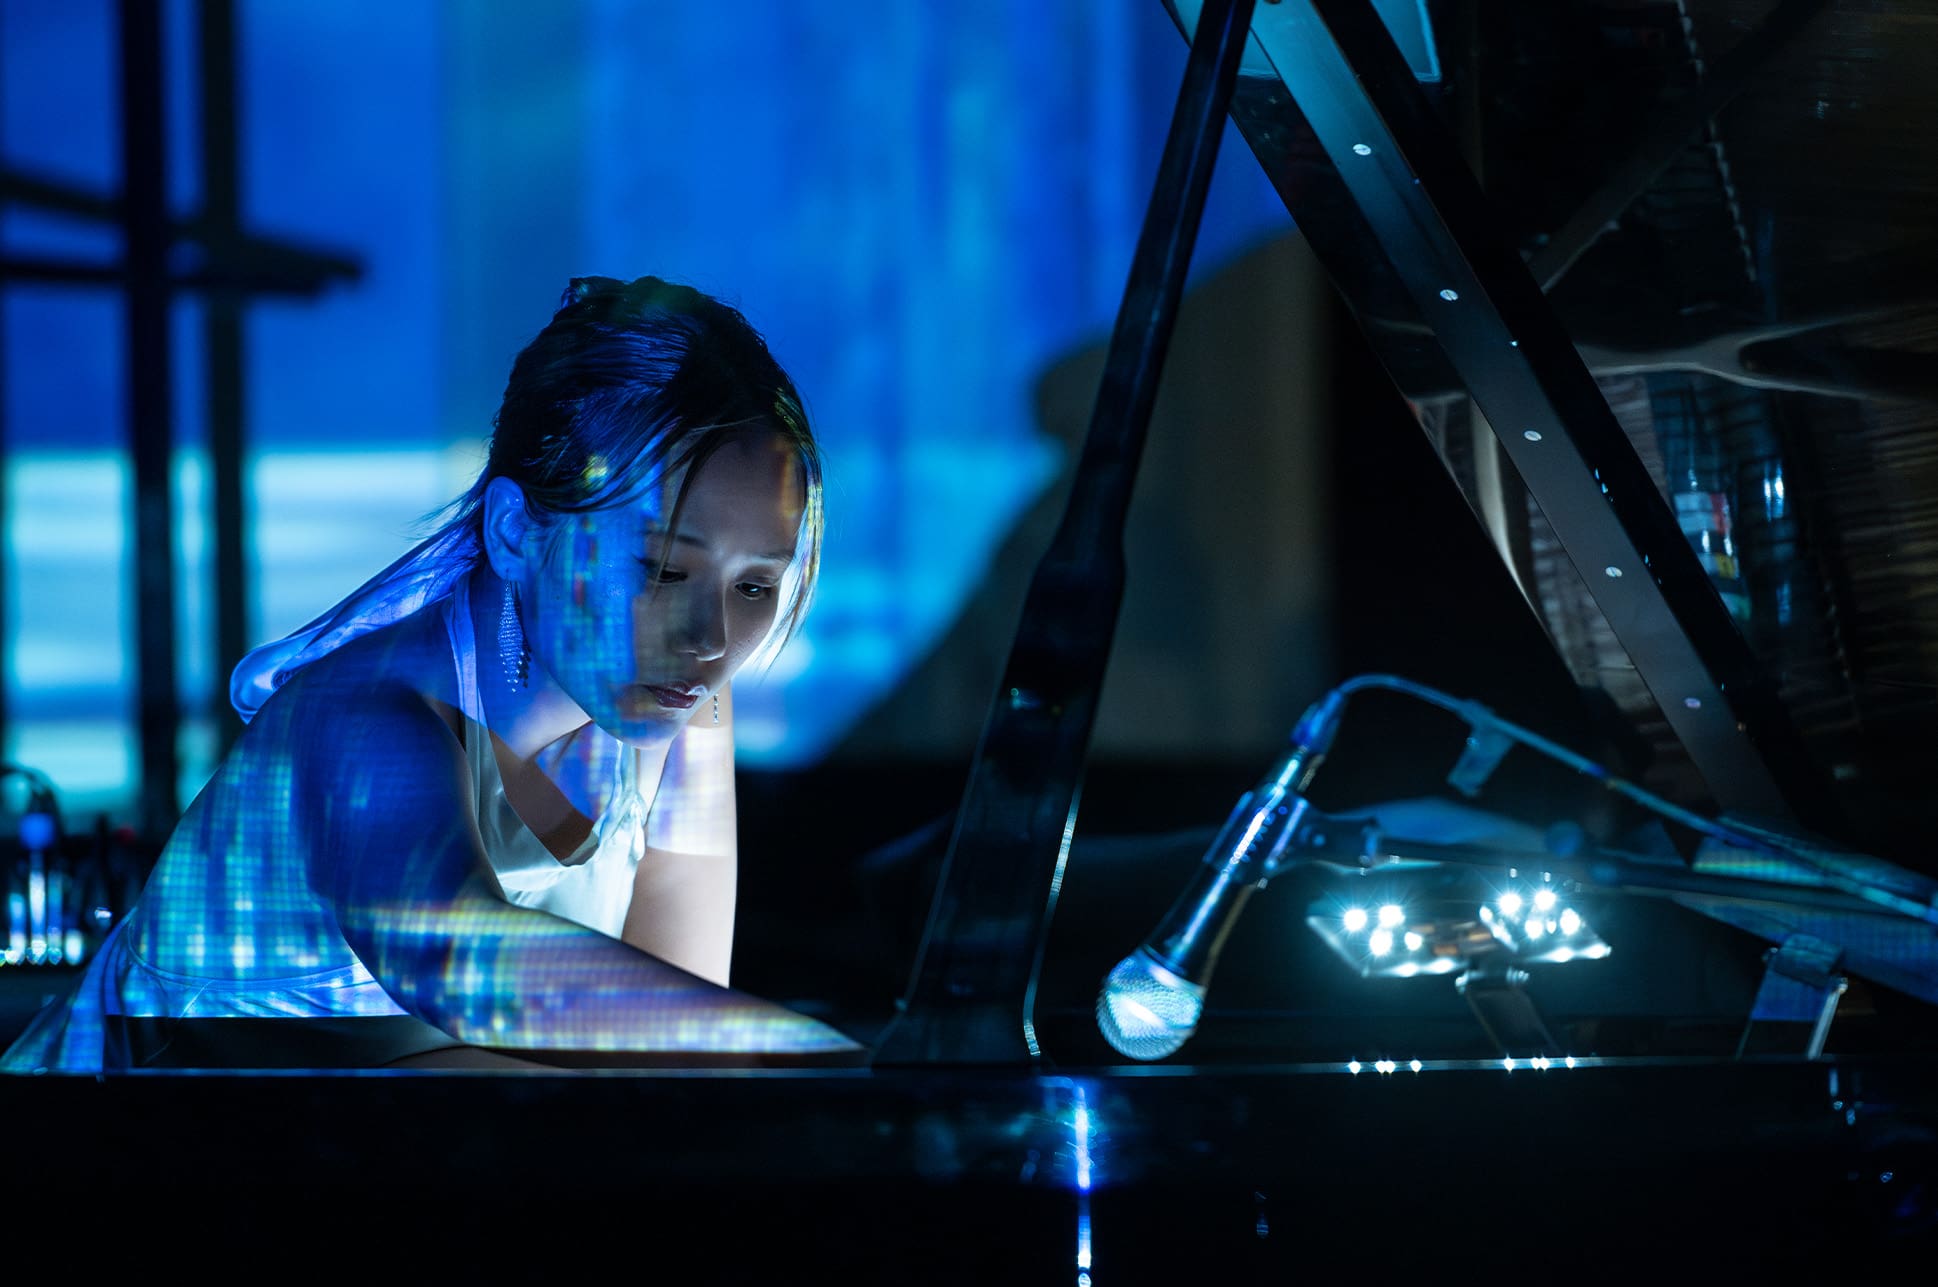 A student performing on piano with colorful projections around her.